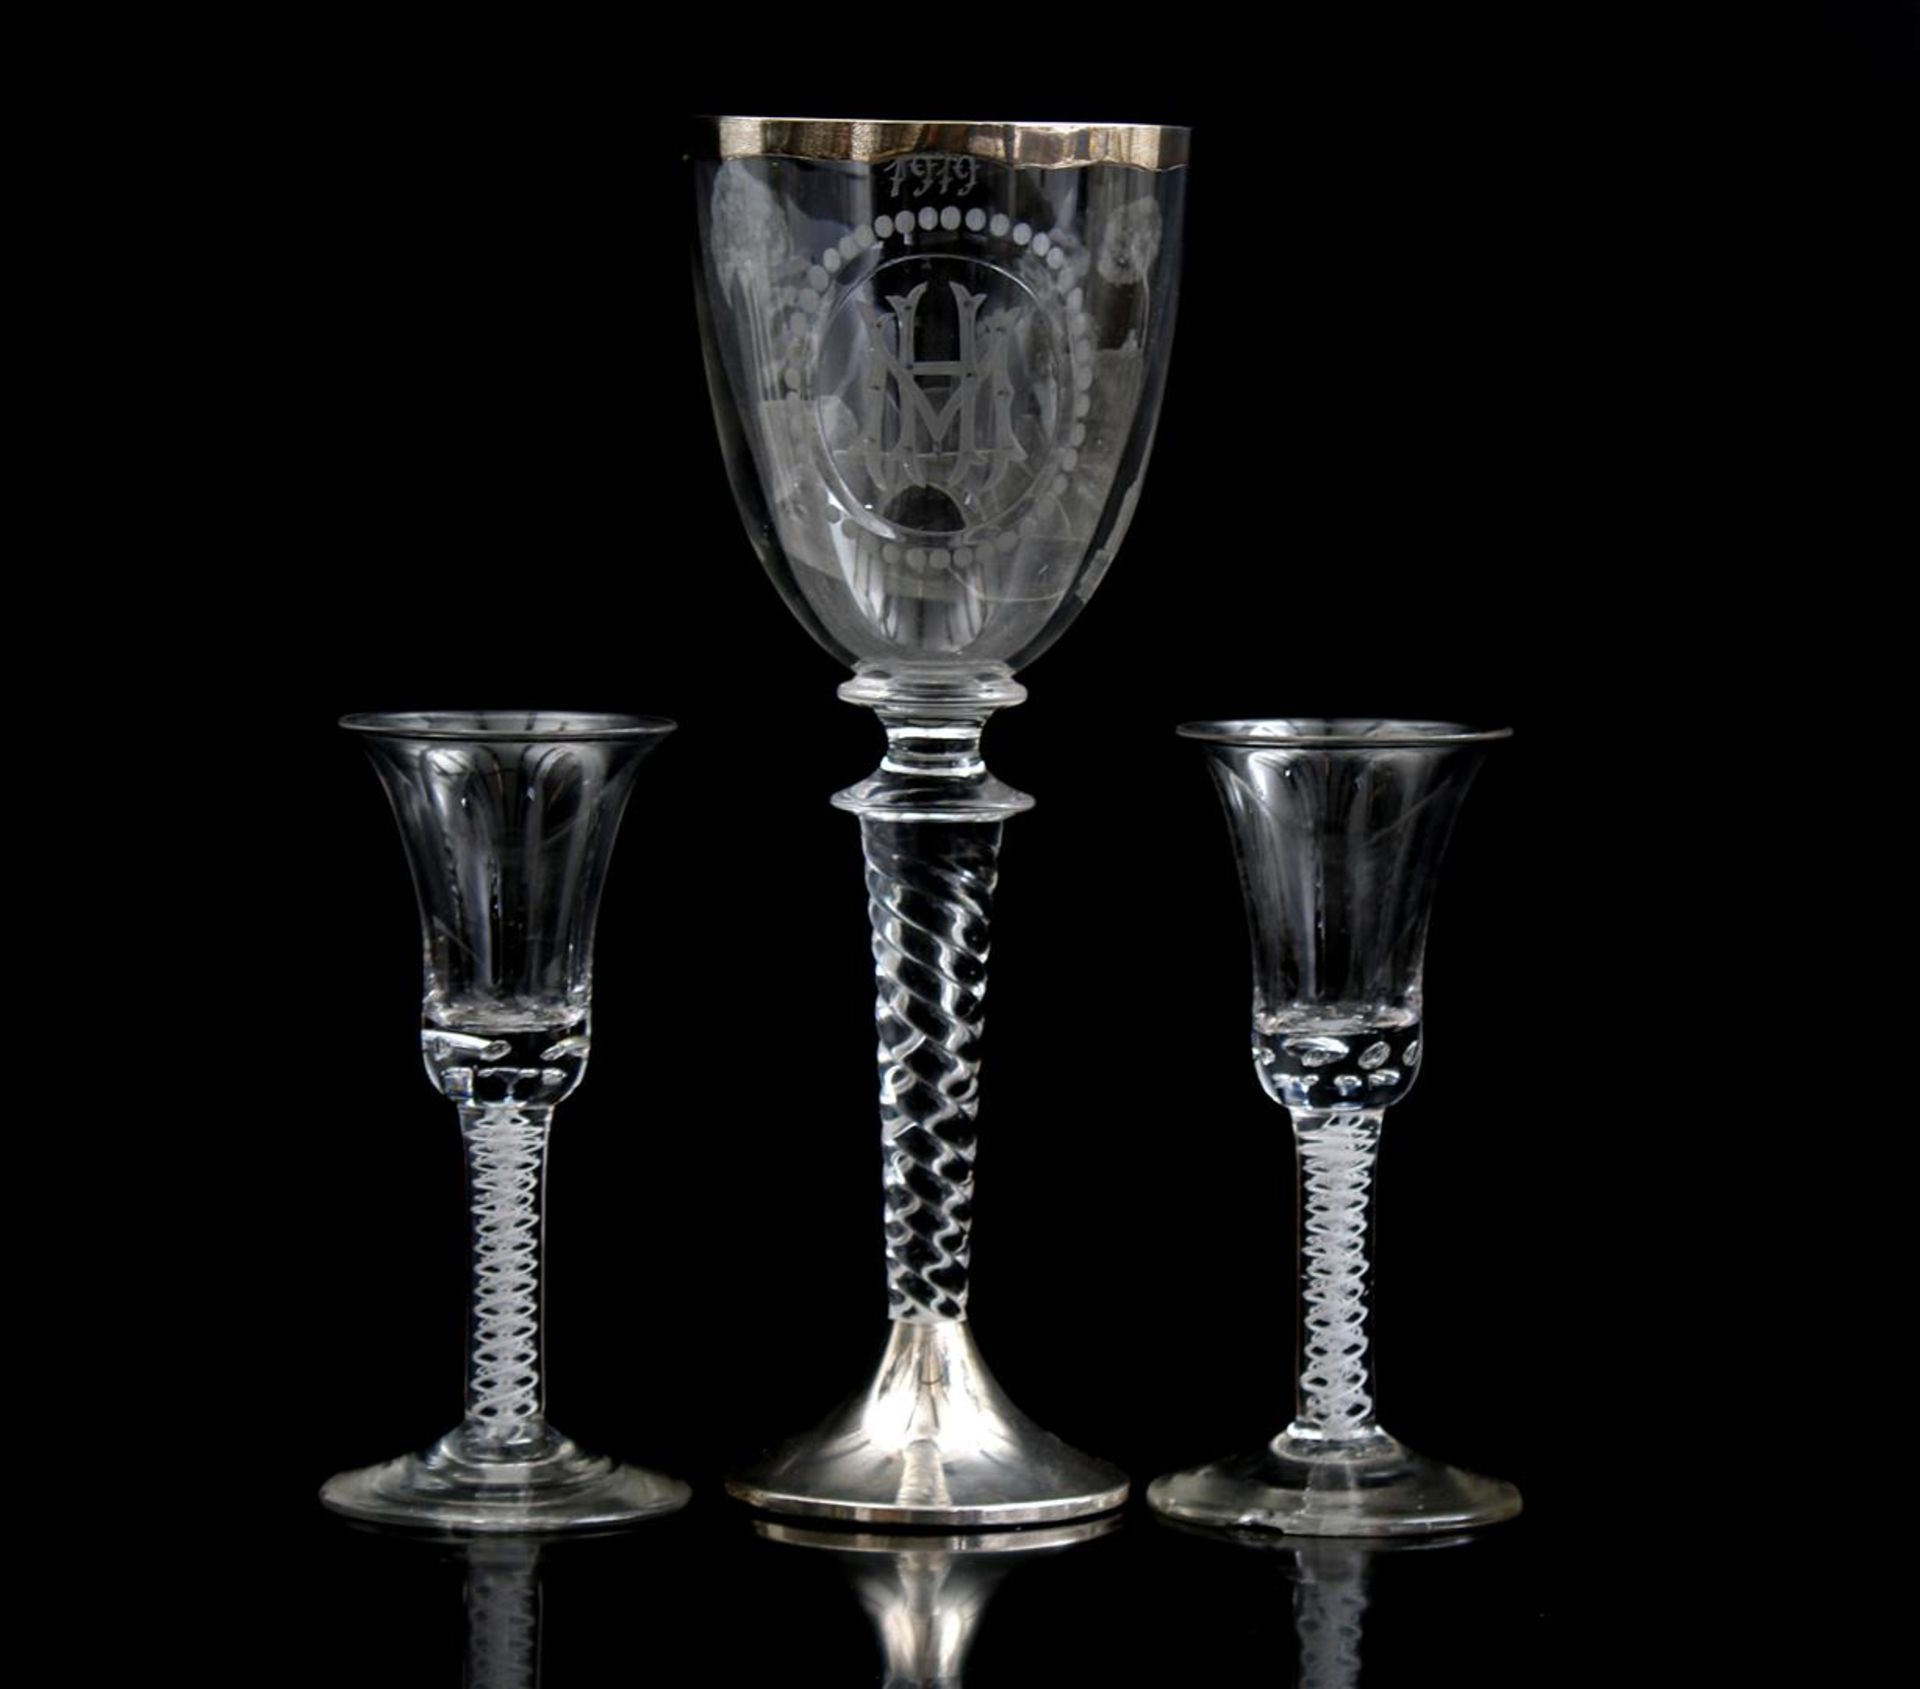 Etched glass goblet with monogram HM and decoration of bridge, dated 1919, on twisted stem, and 2 En